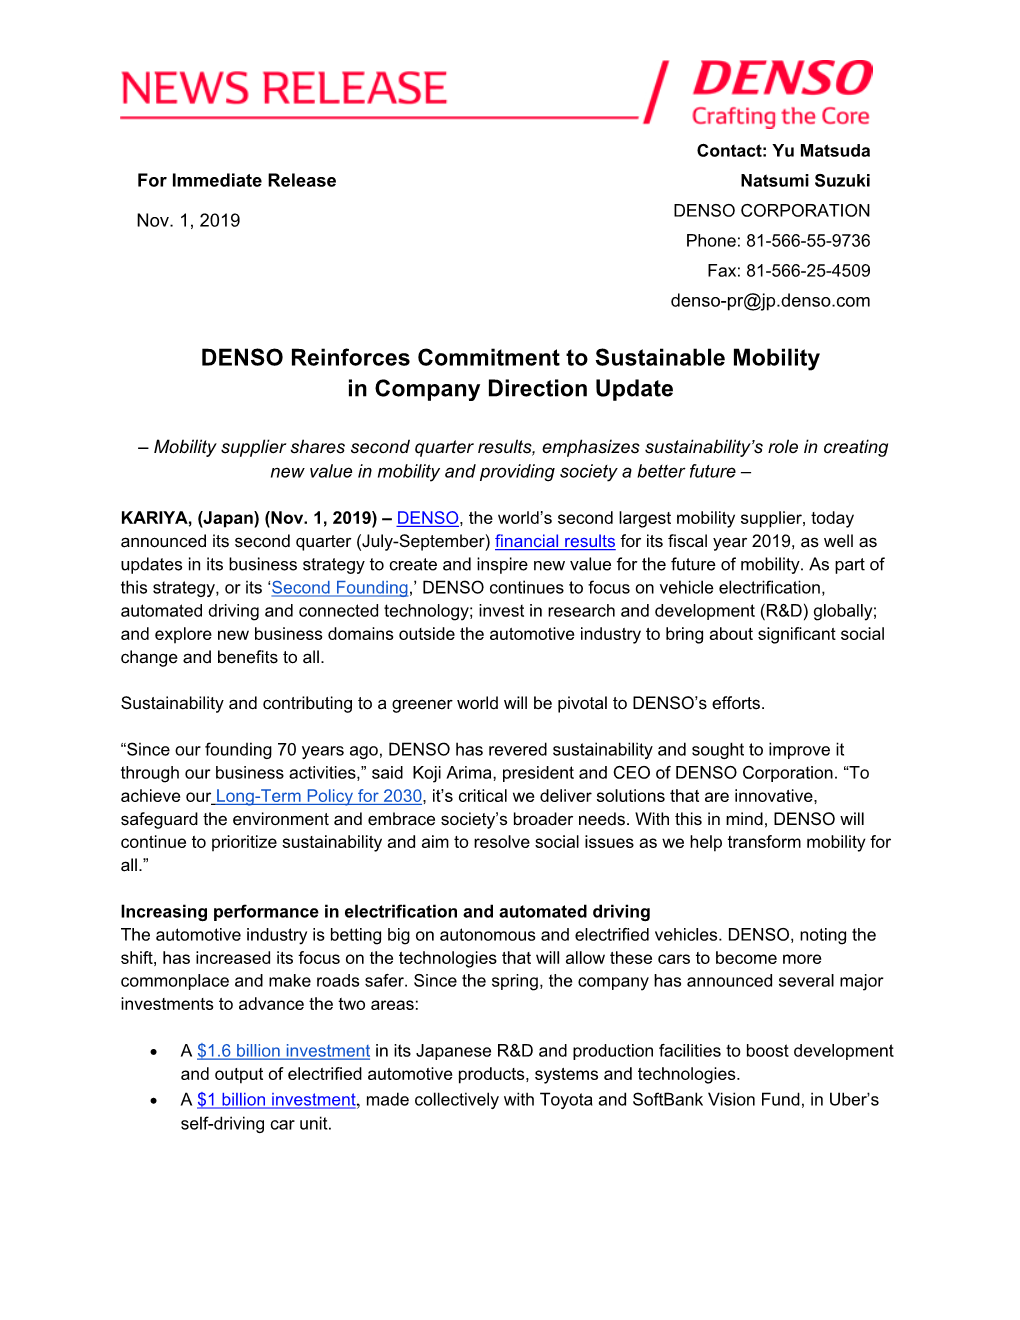 NOV 1 DENSO Reinforces Commitment to Sustainable Mobility